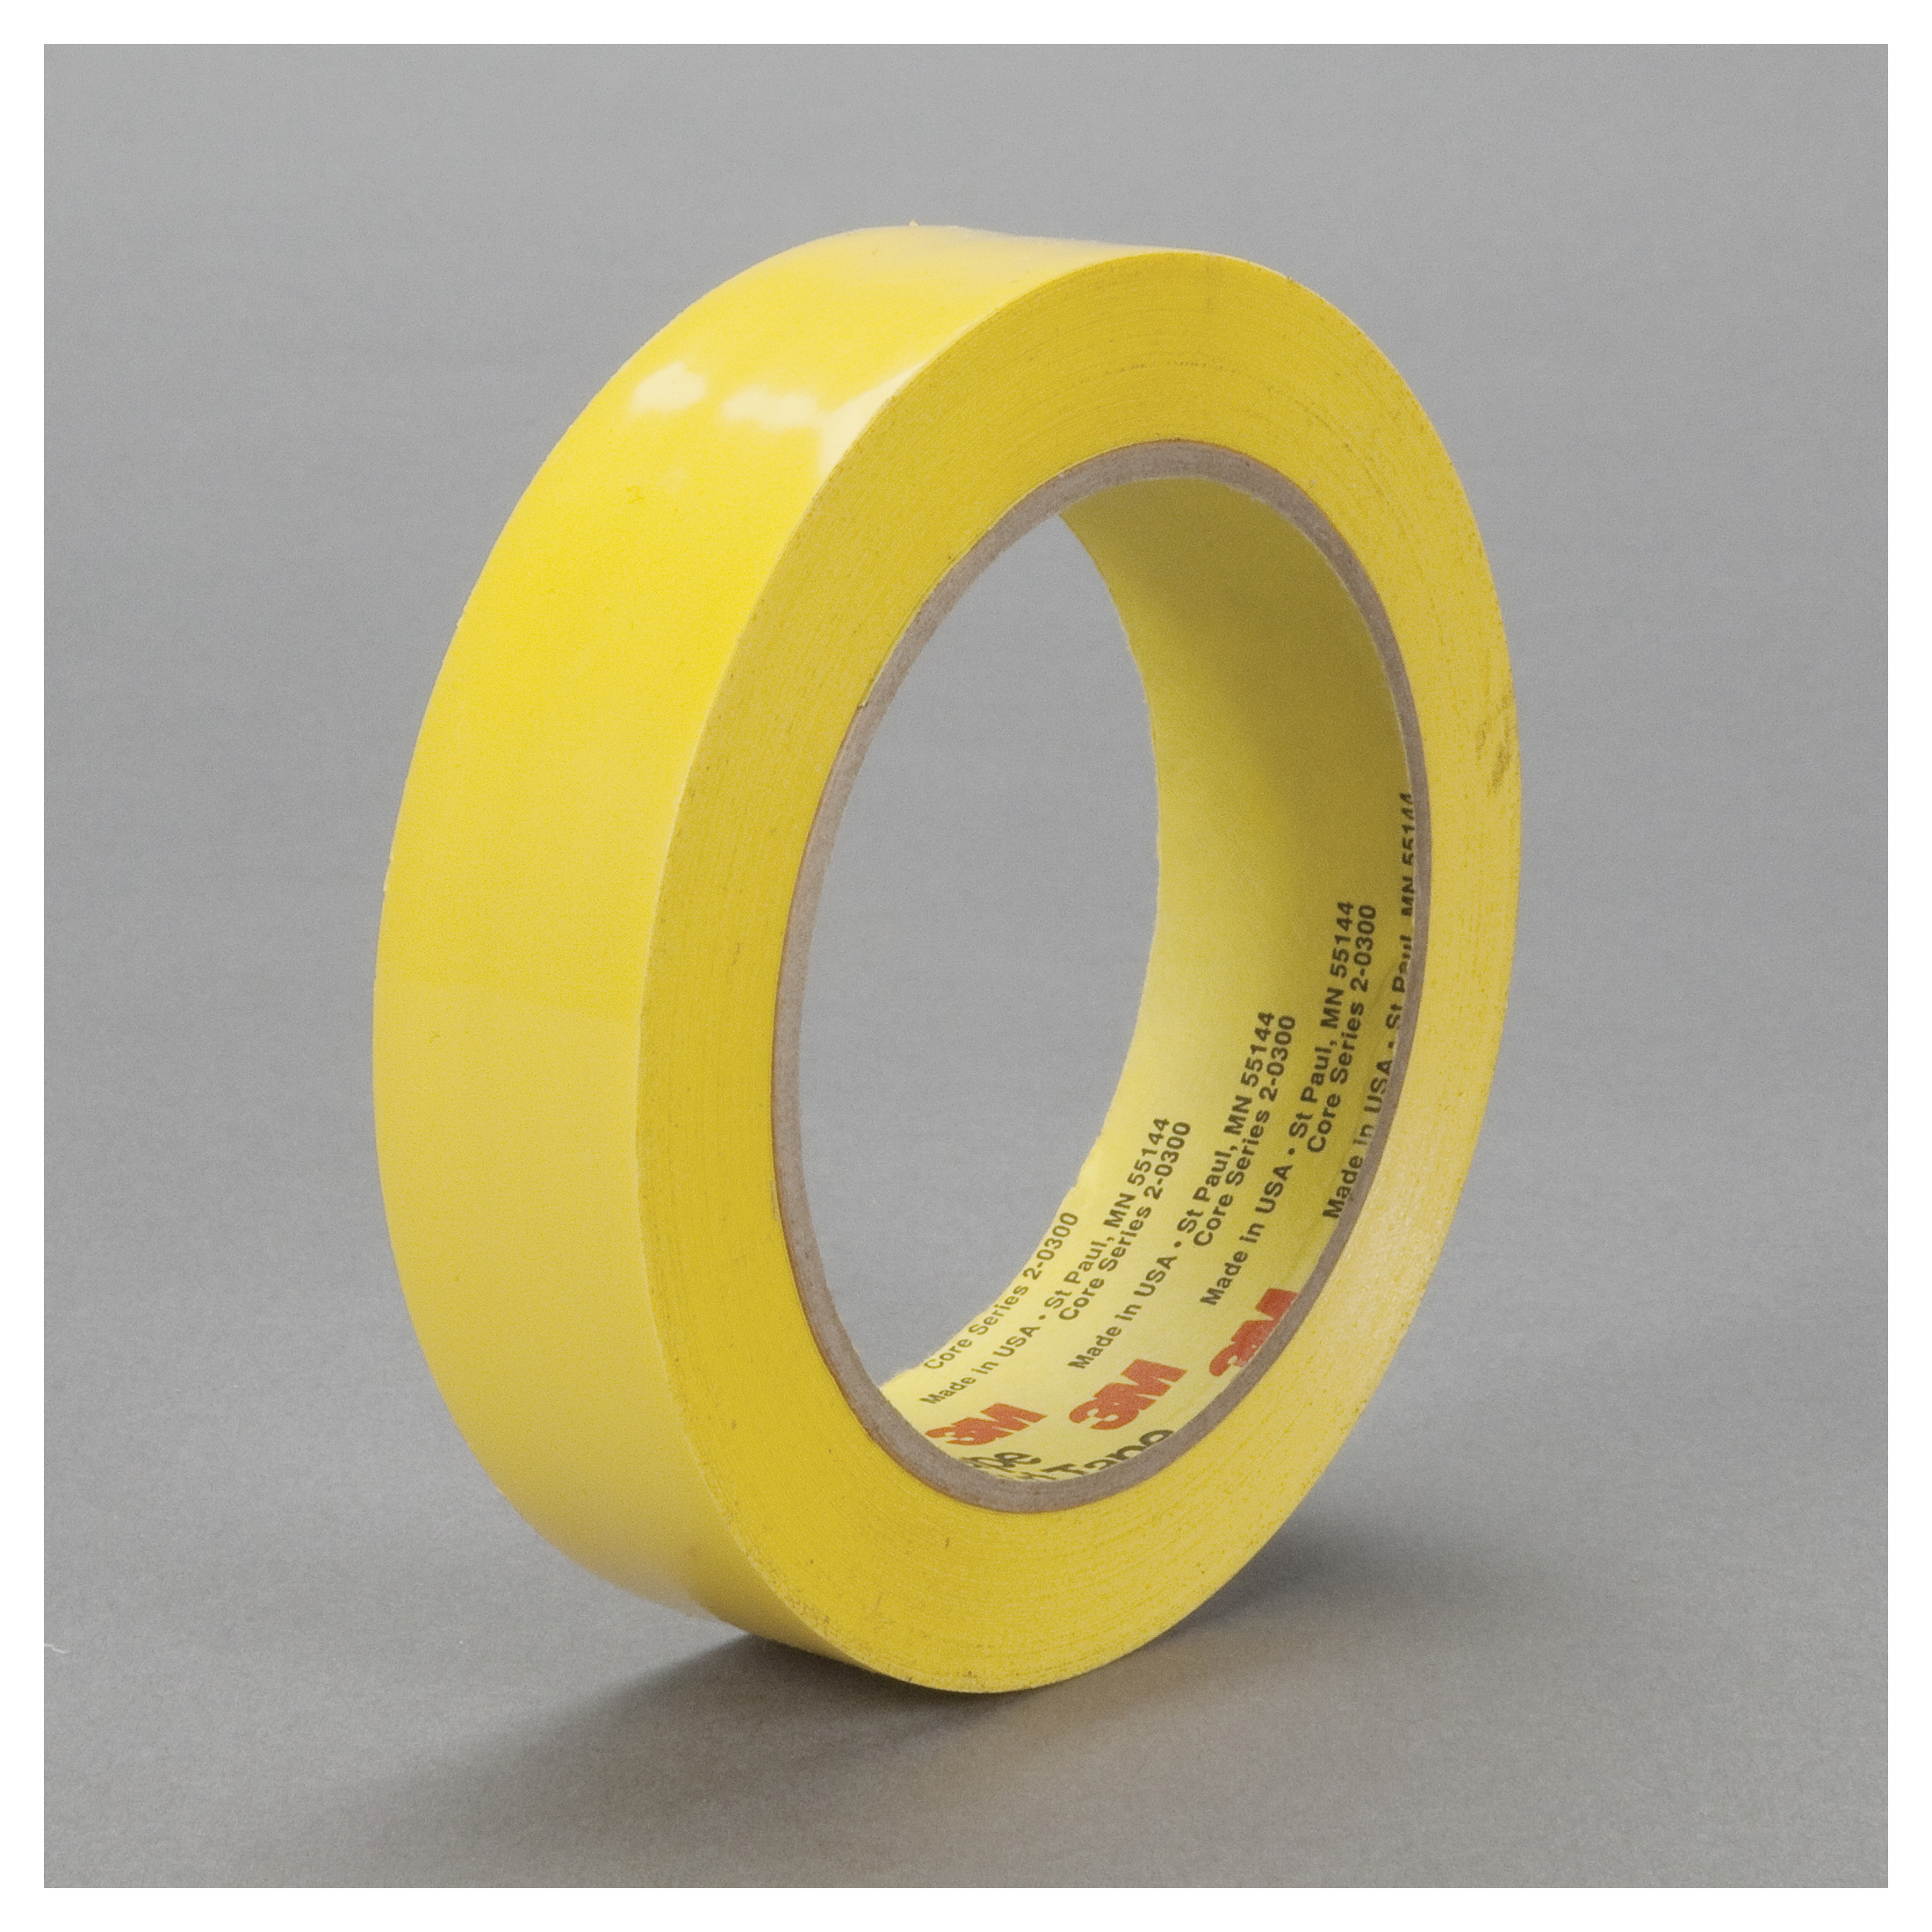 3M™ 021200-05158 Chemical-Resistant General Purpose UV-Resistant Masking Tape, 36 yd L x 2 in W, 5 mil THK, Rubber Adhesive, Polyethylene Backing